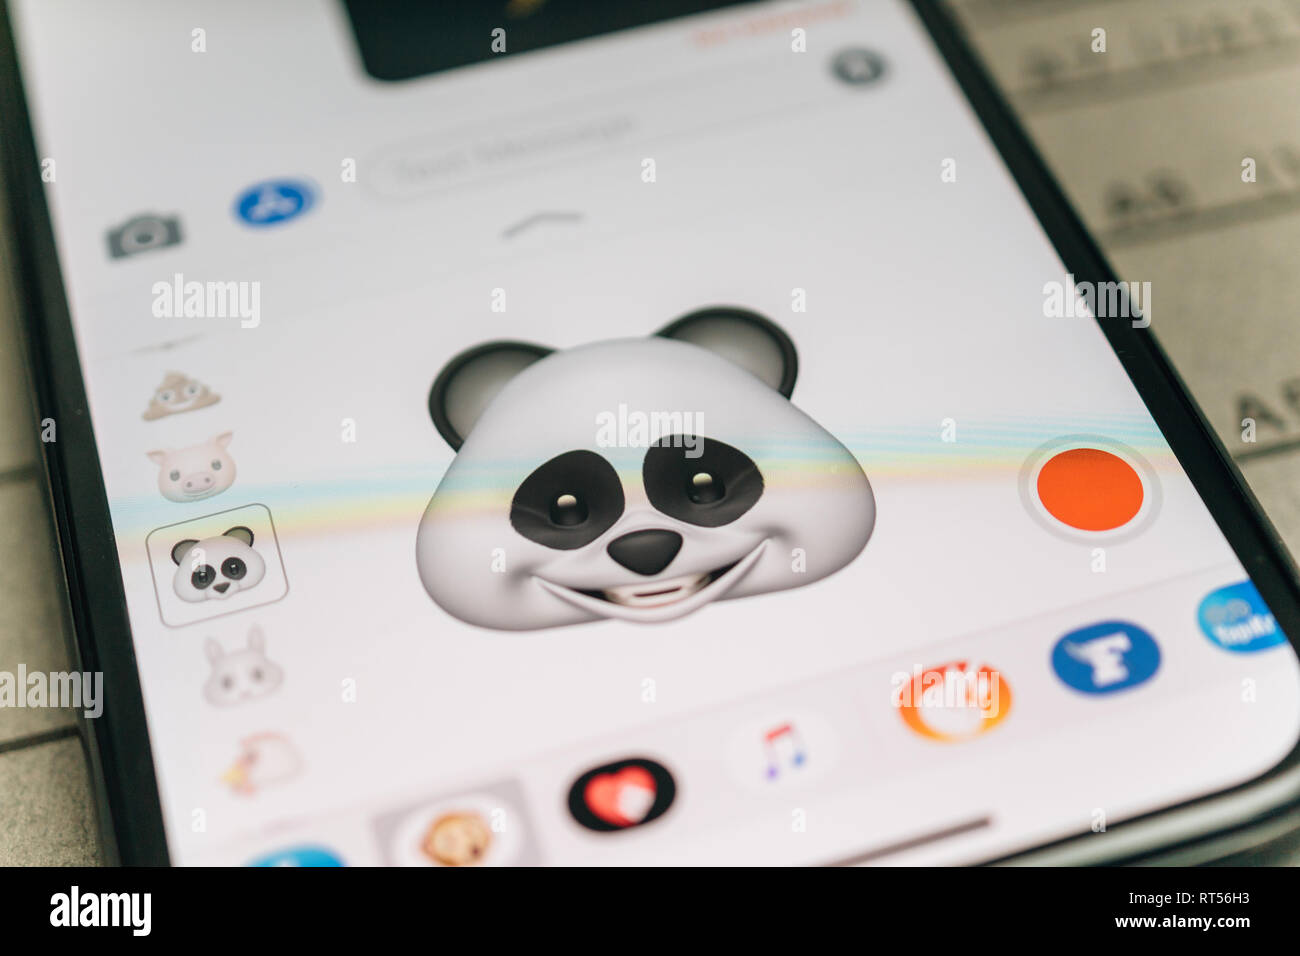 PARIS, FRANCE - NOV 9 2017: Panda bear 3d animoji emoji generated by Face ID facial recognition system with large smile face emotion close-up of the new iphone X 10 Display - tilt-shift lens used  Stock Photo